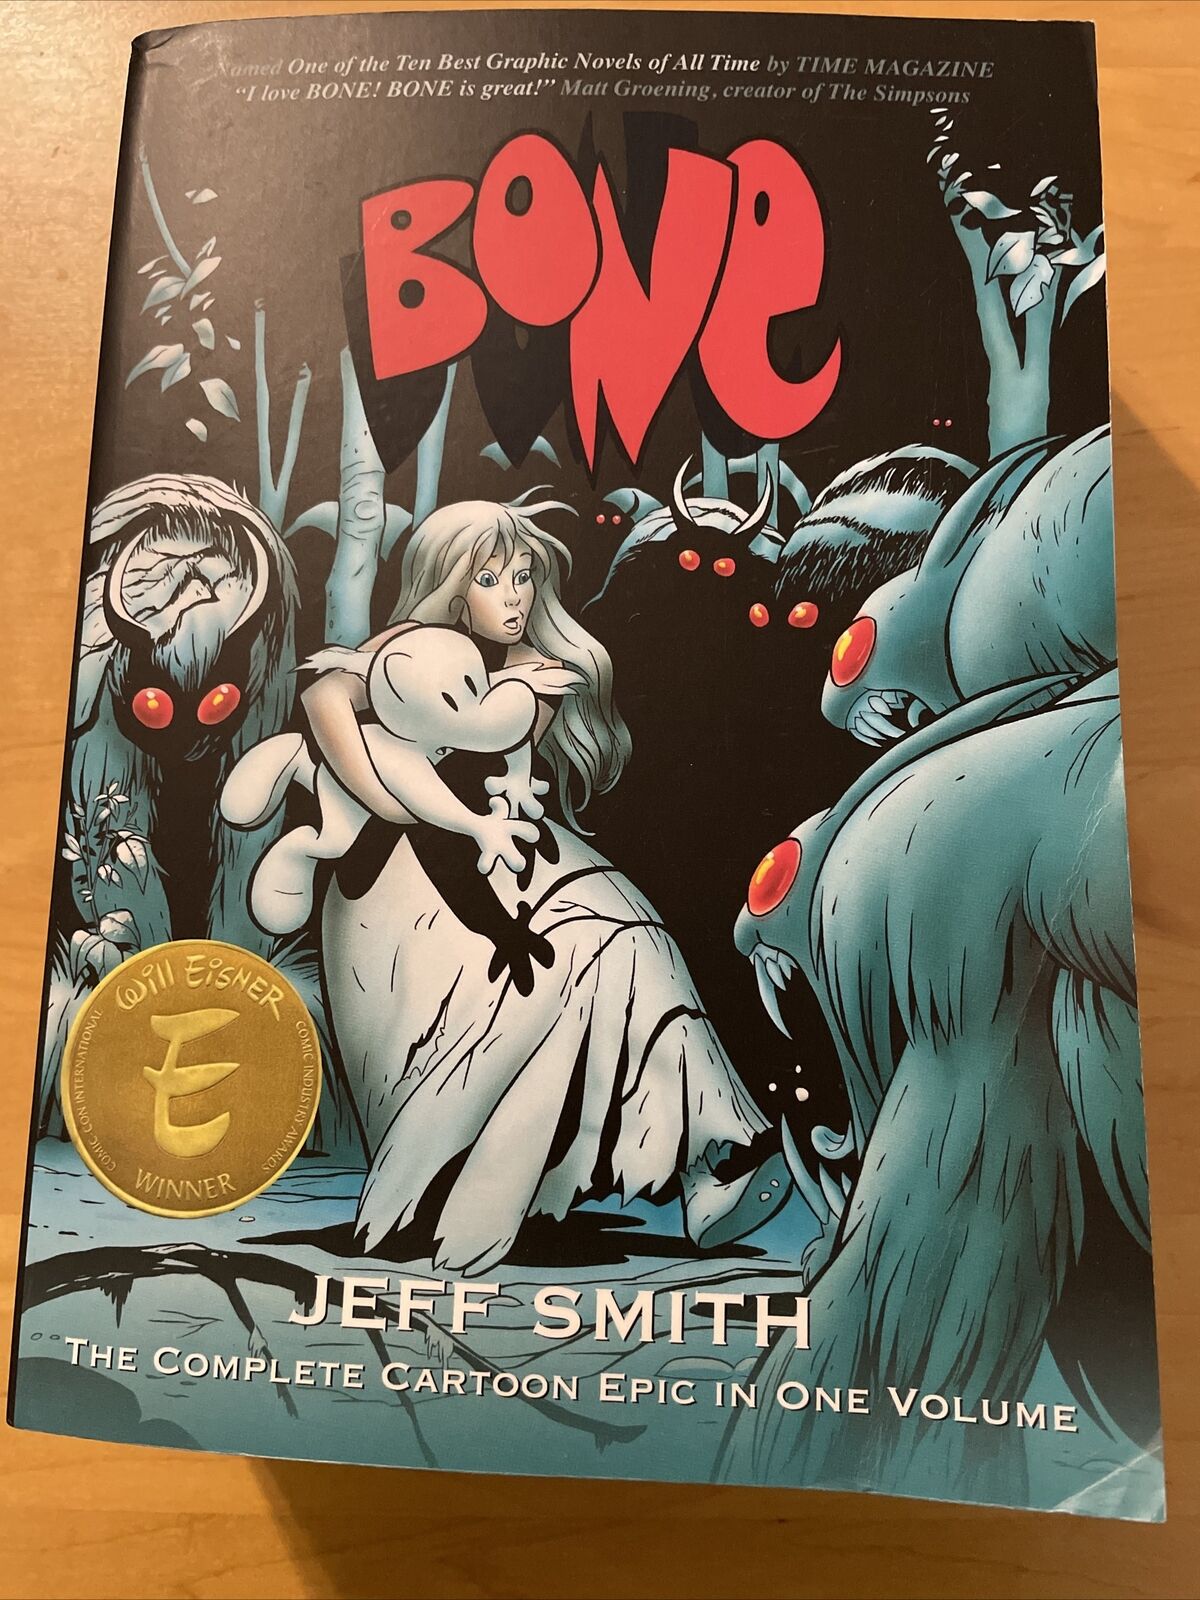 Bone: The Complete Cartoon Epic in One Volume by Jeff Smith - Very Used